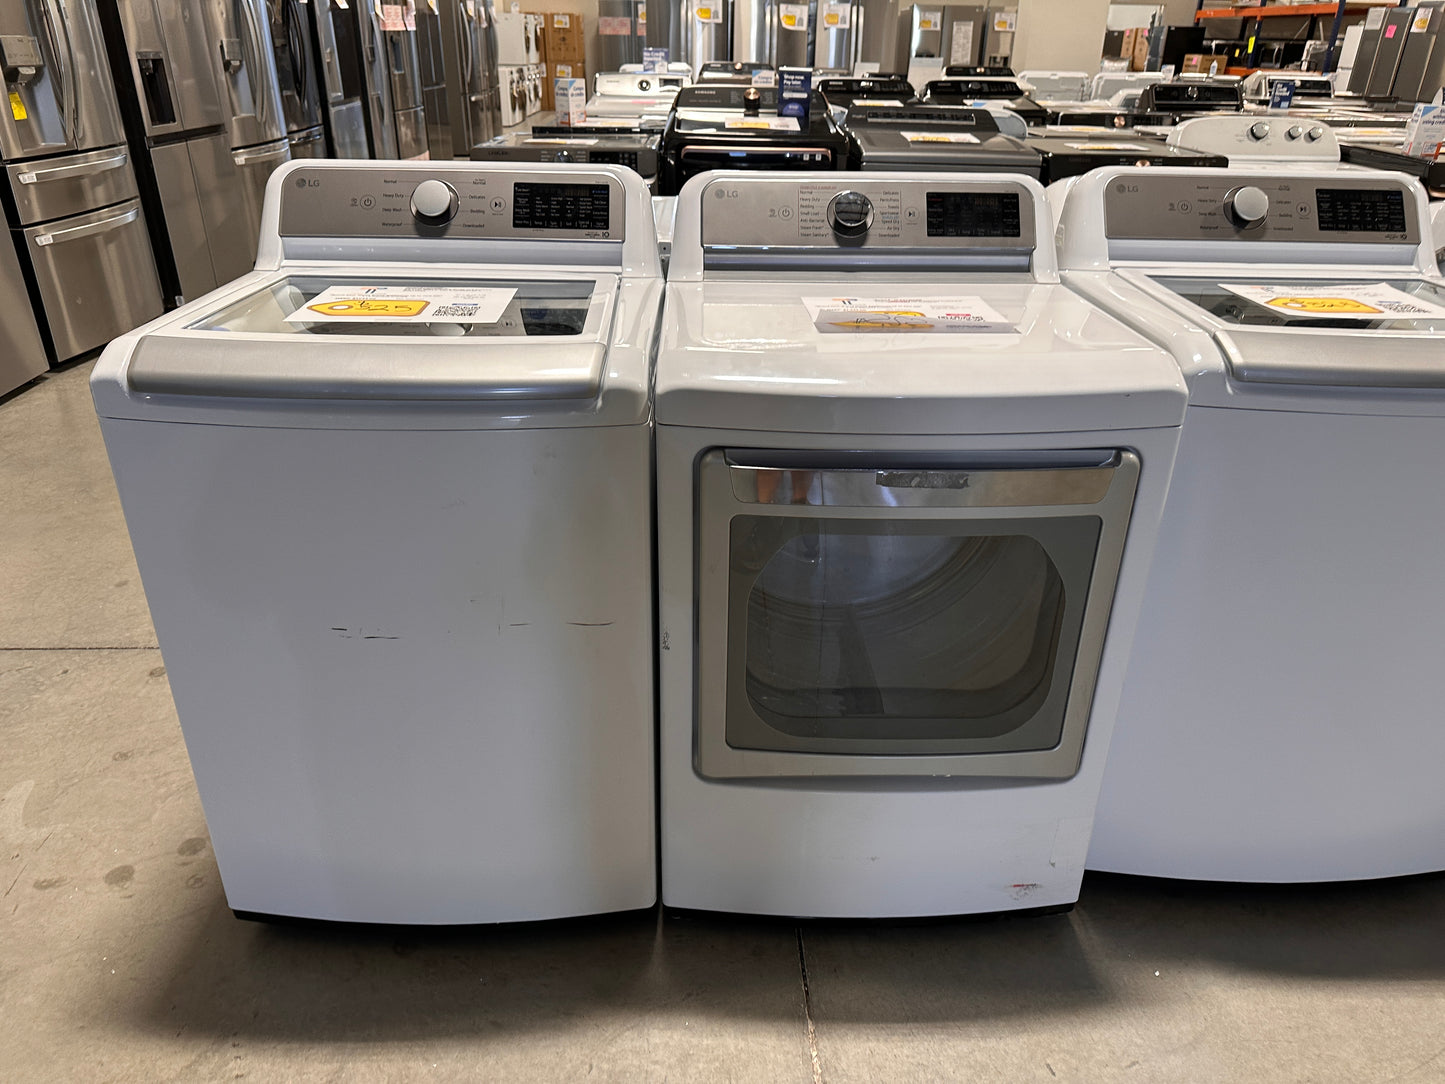 BRAND NEW LG SMART TOP LOAD WASHER ELECTRIC DRYER LAUNDRY SET - WAS13154 DRY12241